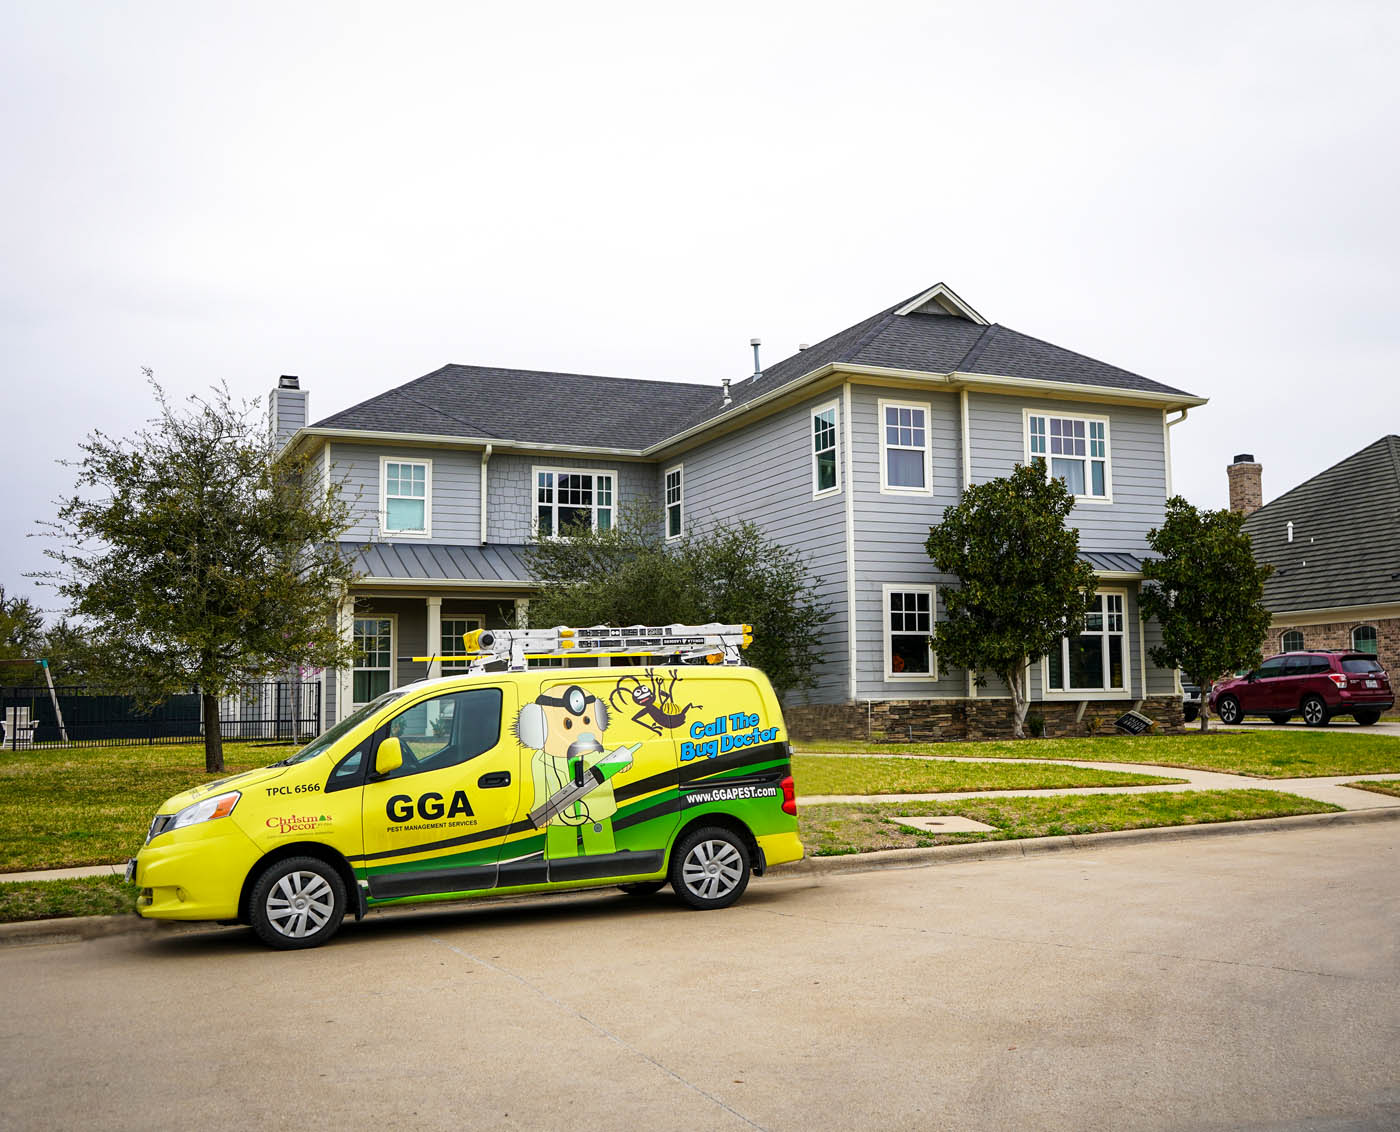 A GGA Pest Management vehicle in front of a residential home - learn how we can help with our roach exterminator services in Killeen, TX.